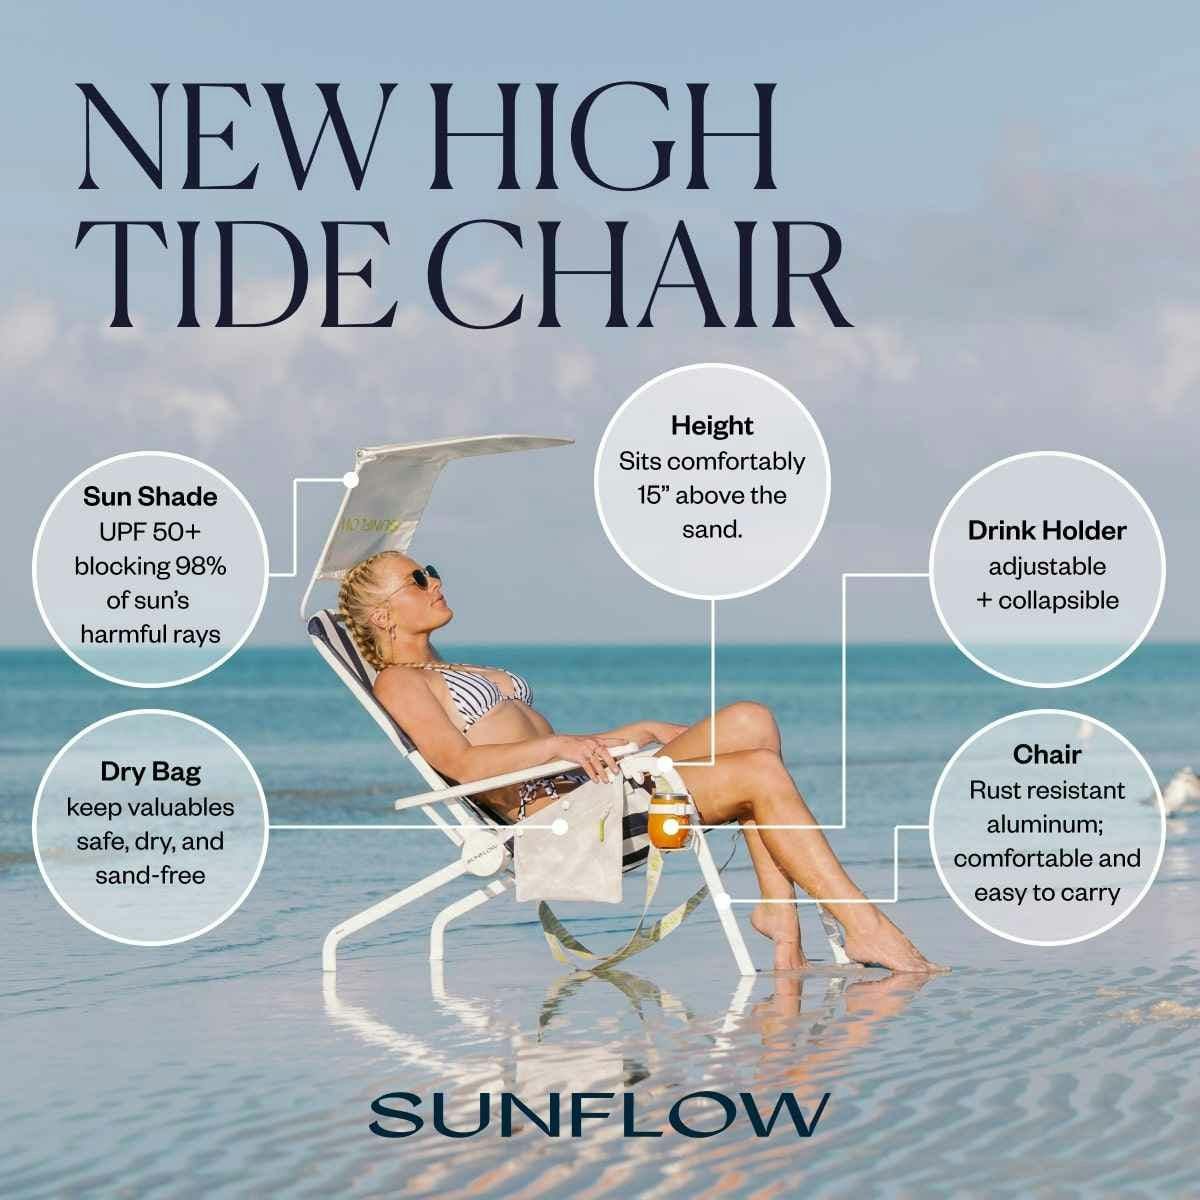 Digital ad pointing out the benefits of the "New High Tide Chair" by Sunflow